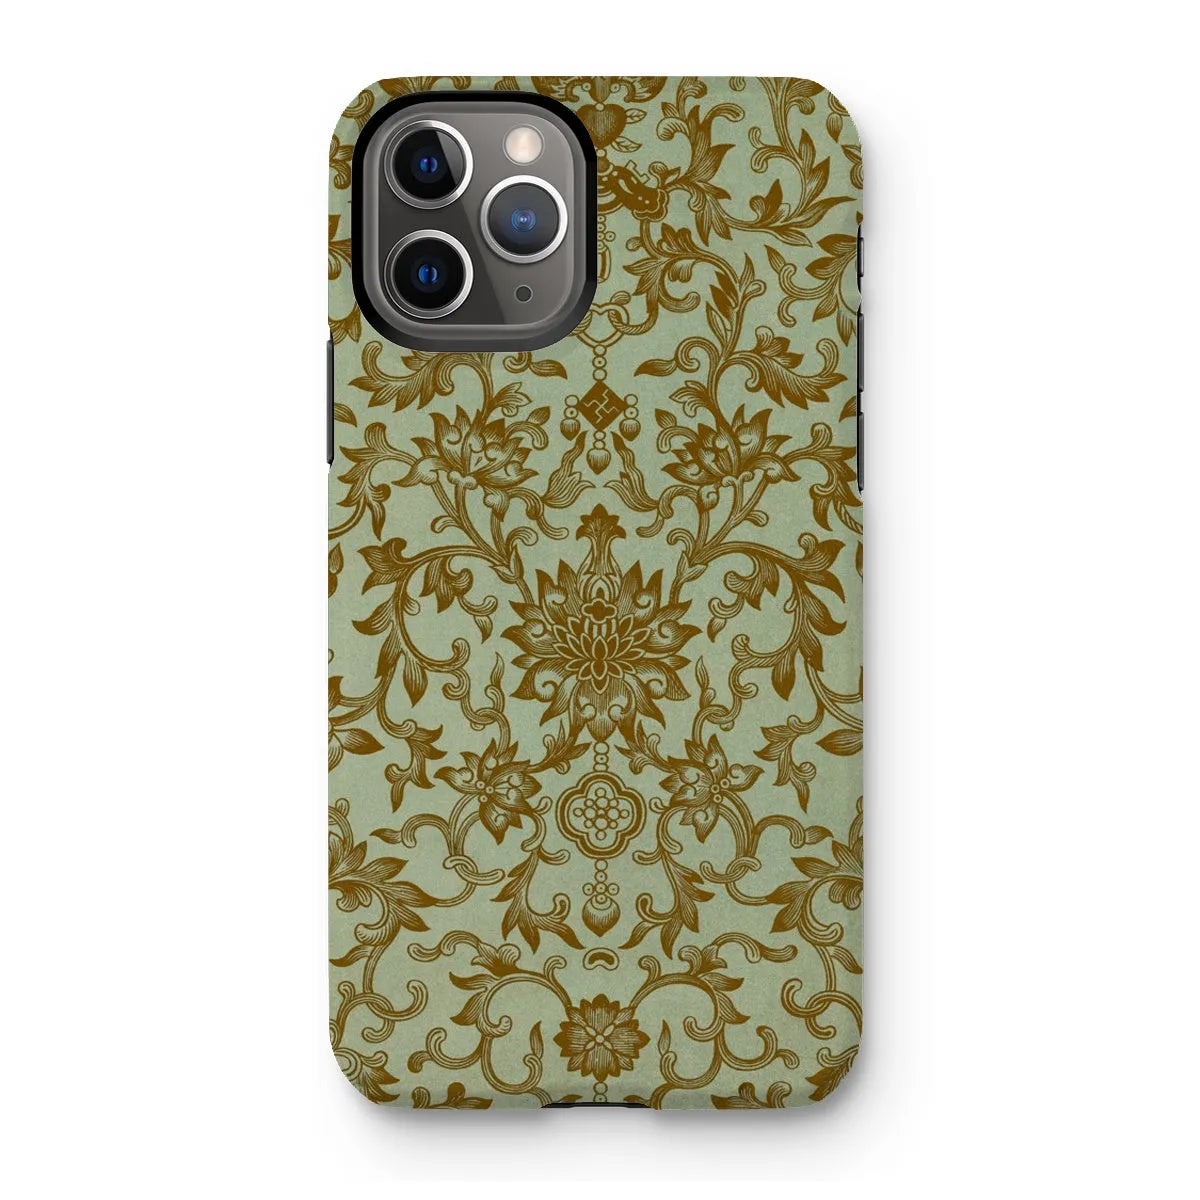 Earthy Chinese Floral Art Pattern Phone Case - Owen Jones - Iphone 11 Pro / Matte - Mobile Phone Cases - Aesthetic Art